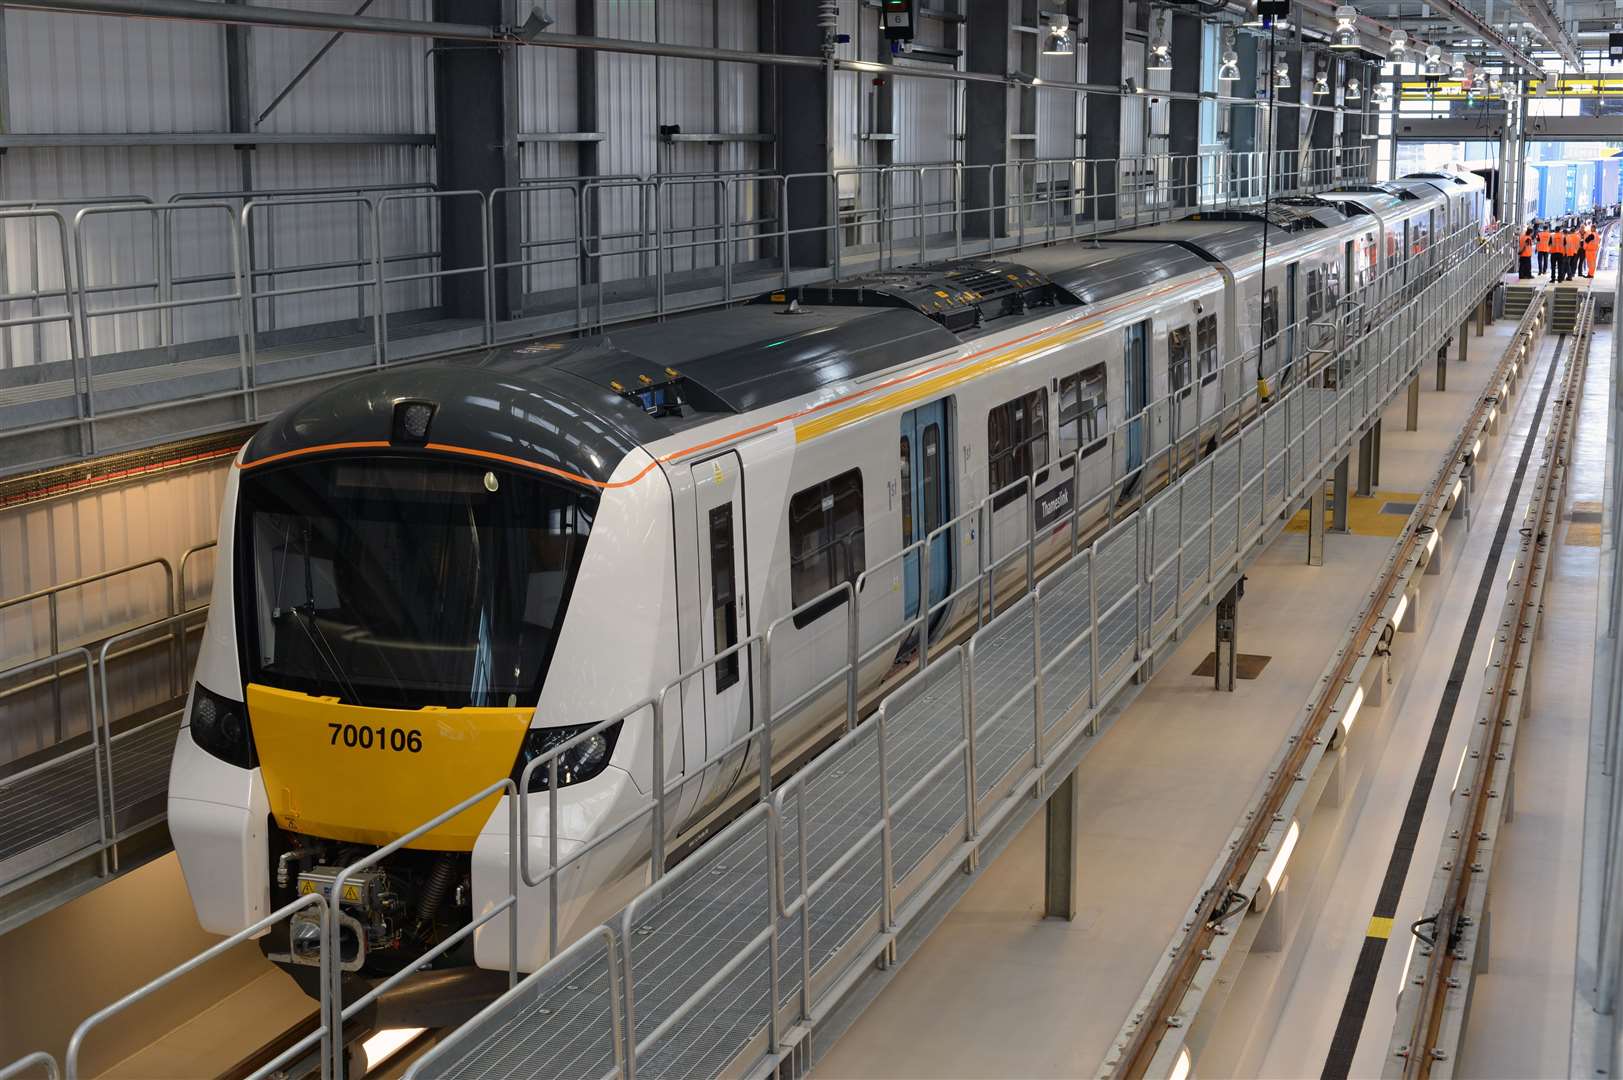 The Thameslink service connecting London and Maidstone East was promised for December 2019